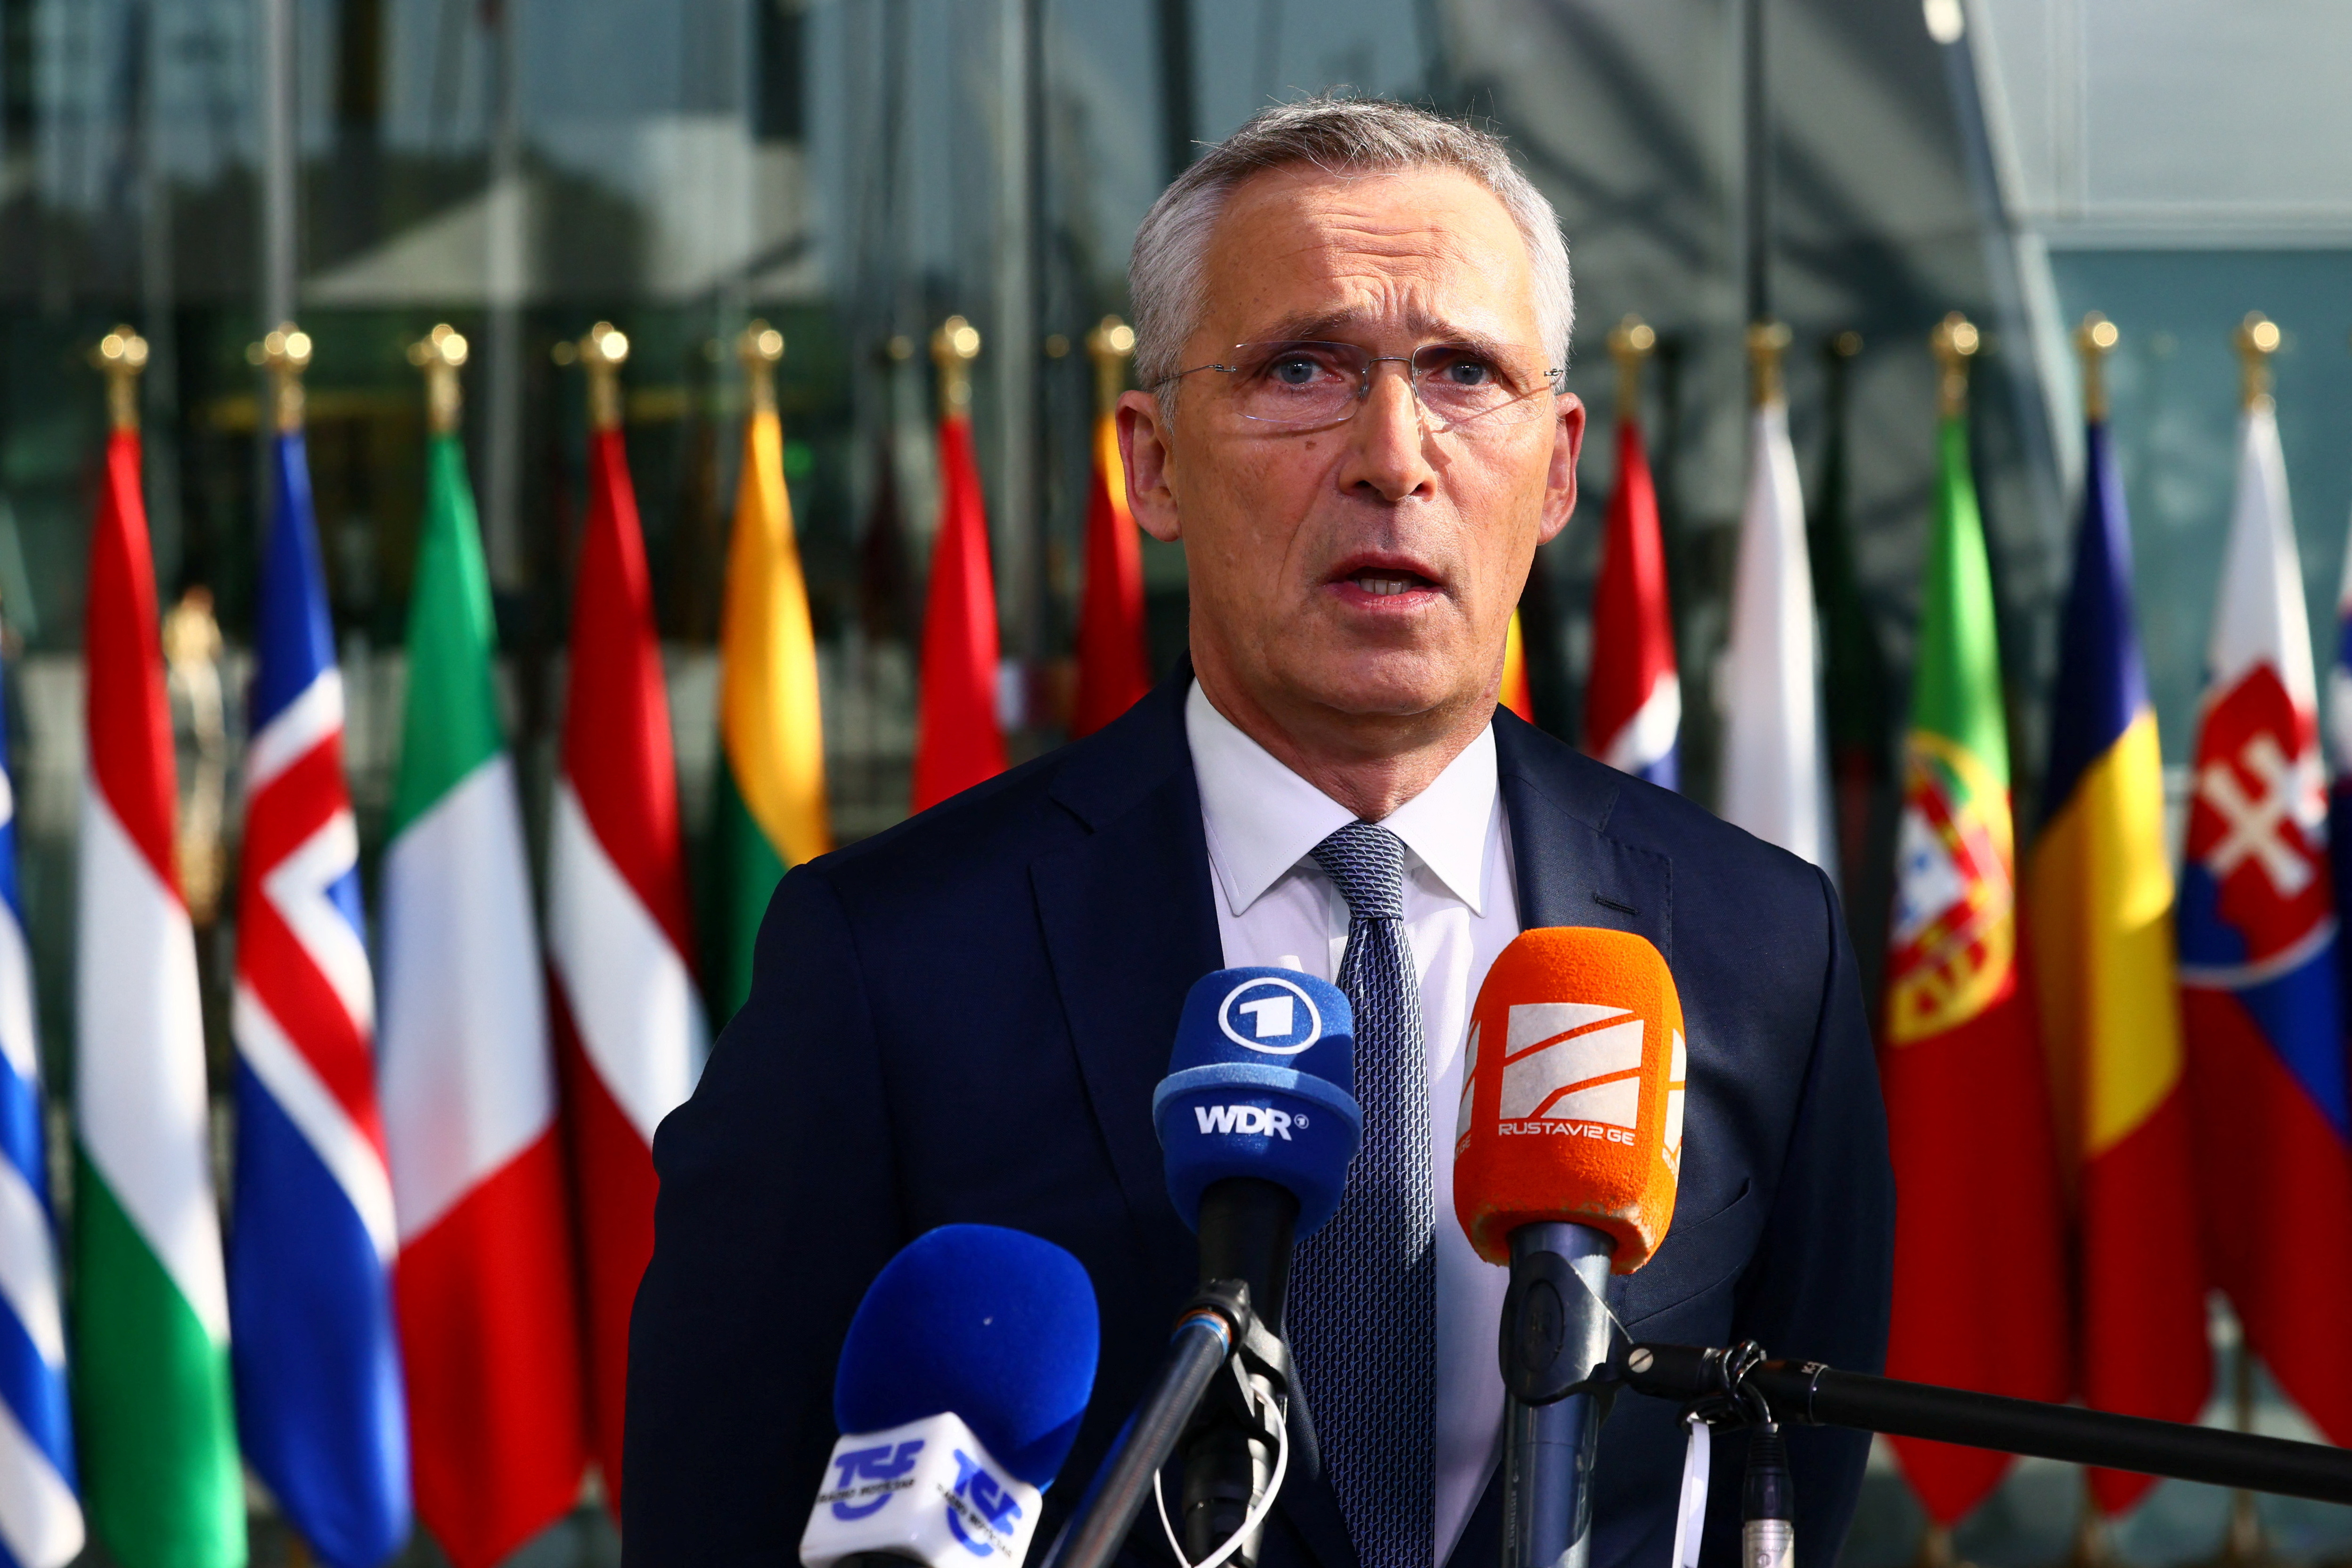 NATO Defence Ministers' meet in Brussels